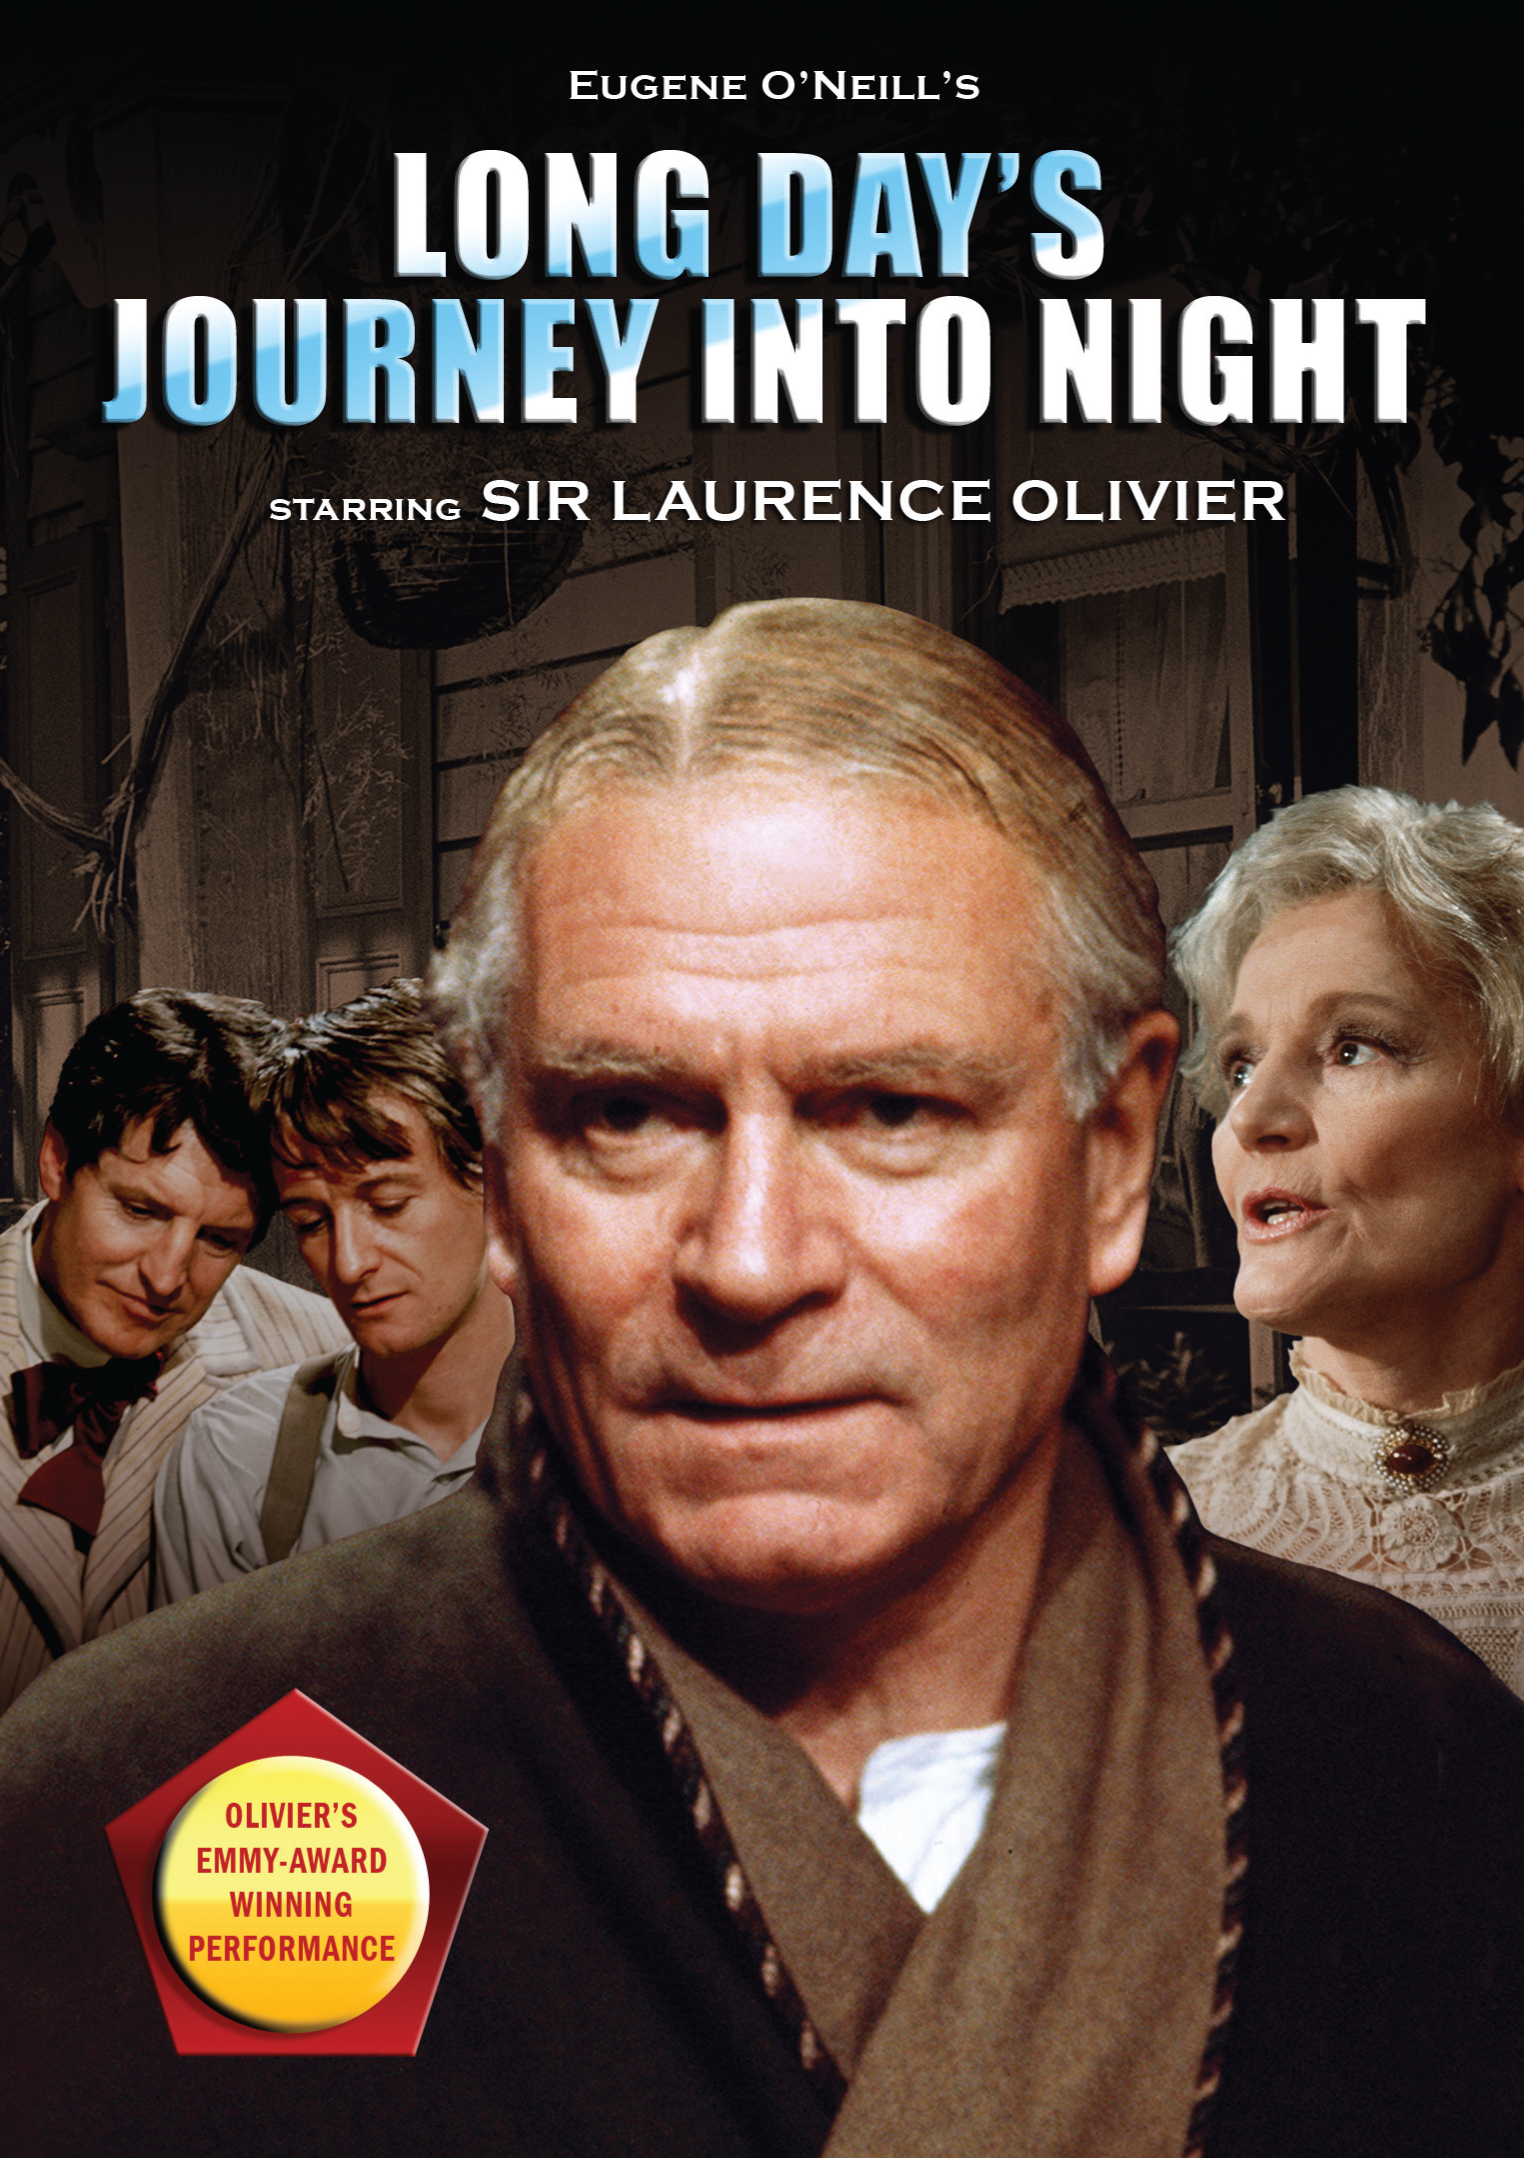 a long day's journey into night analysis